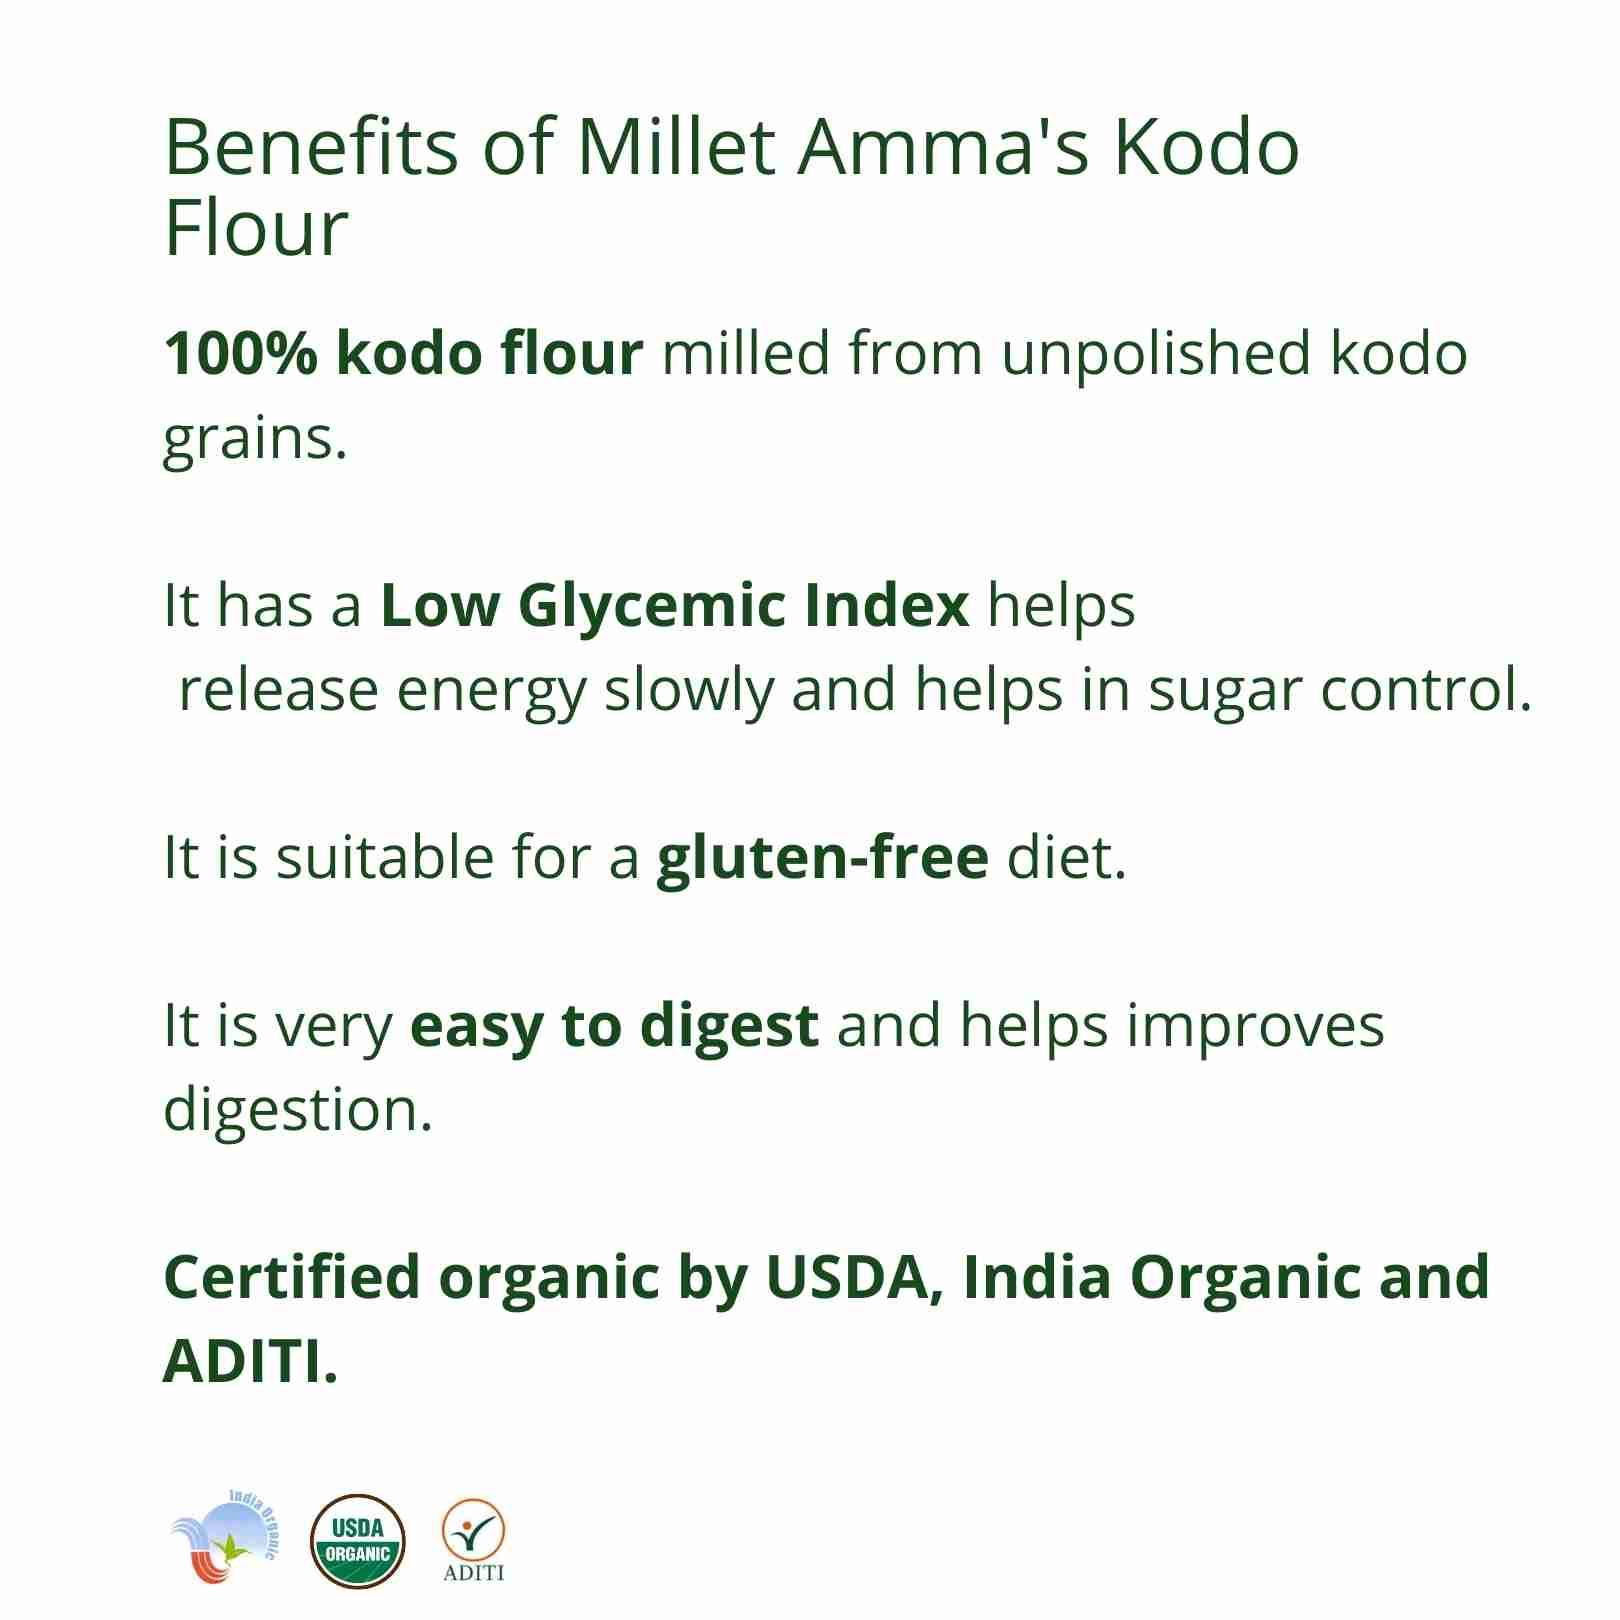 Millet Amma’s Organic Kodo Millet Flour- Millet Amma’s Organic Kodo Millet Flour is milled from unpolished Kodo Millets.   It is rich in fiber, B Complex vitamins and essential amino acids.  Kodo Millet has a low glycemic index and aids in controlling your glucose levels.  You can make a variety of gluten-free dishes with Kodo Millet flour like rotis, pancakes, crepes, bread, cakes, cookies and other food.